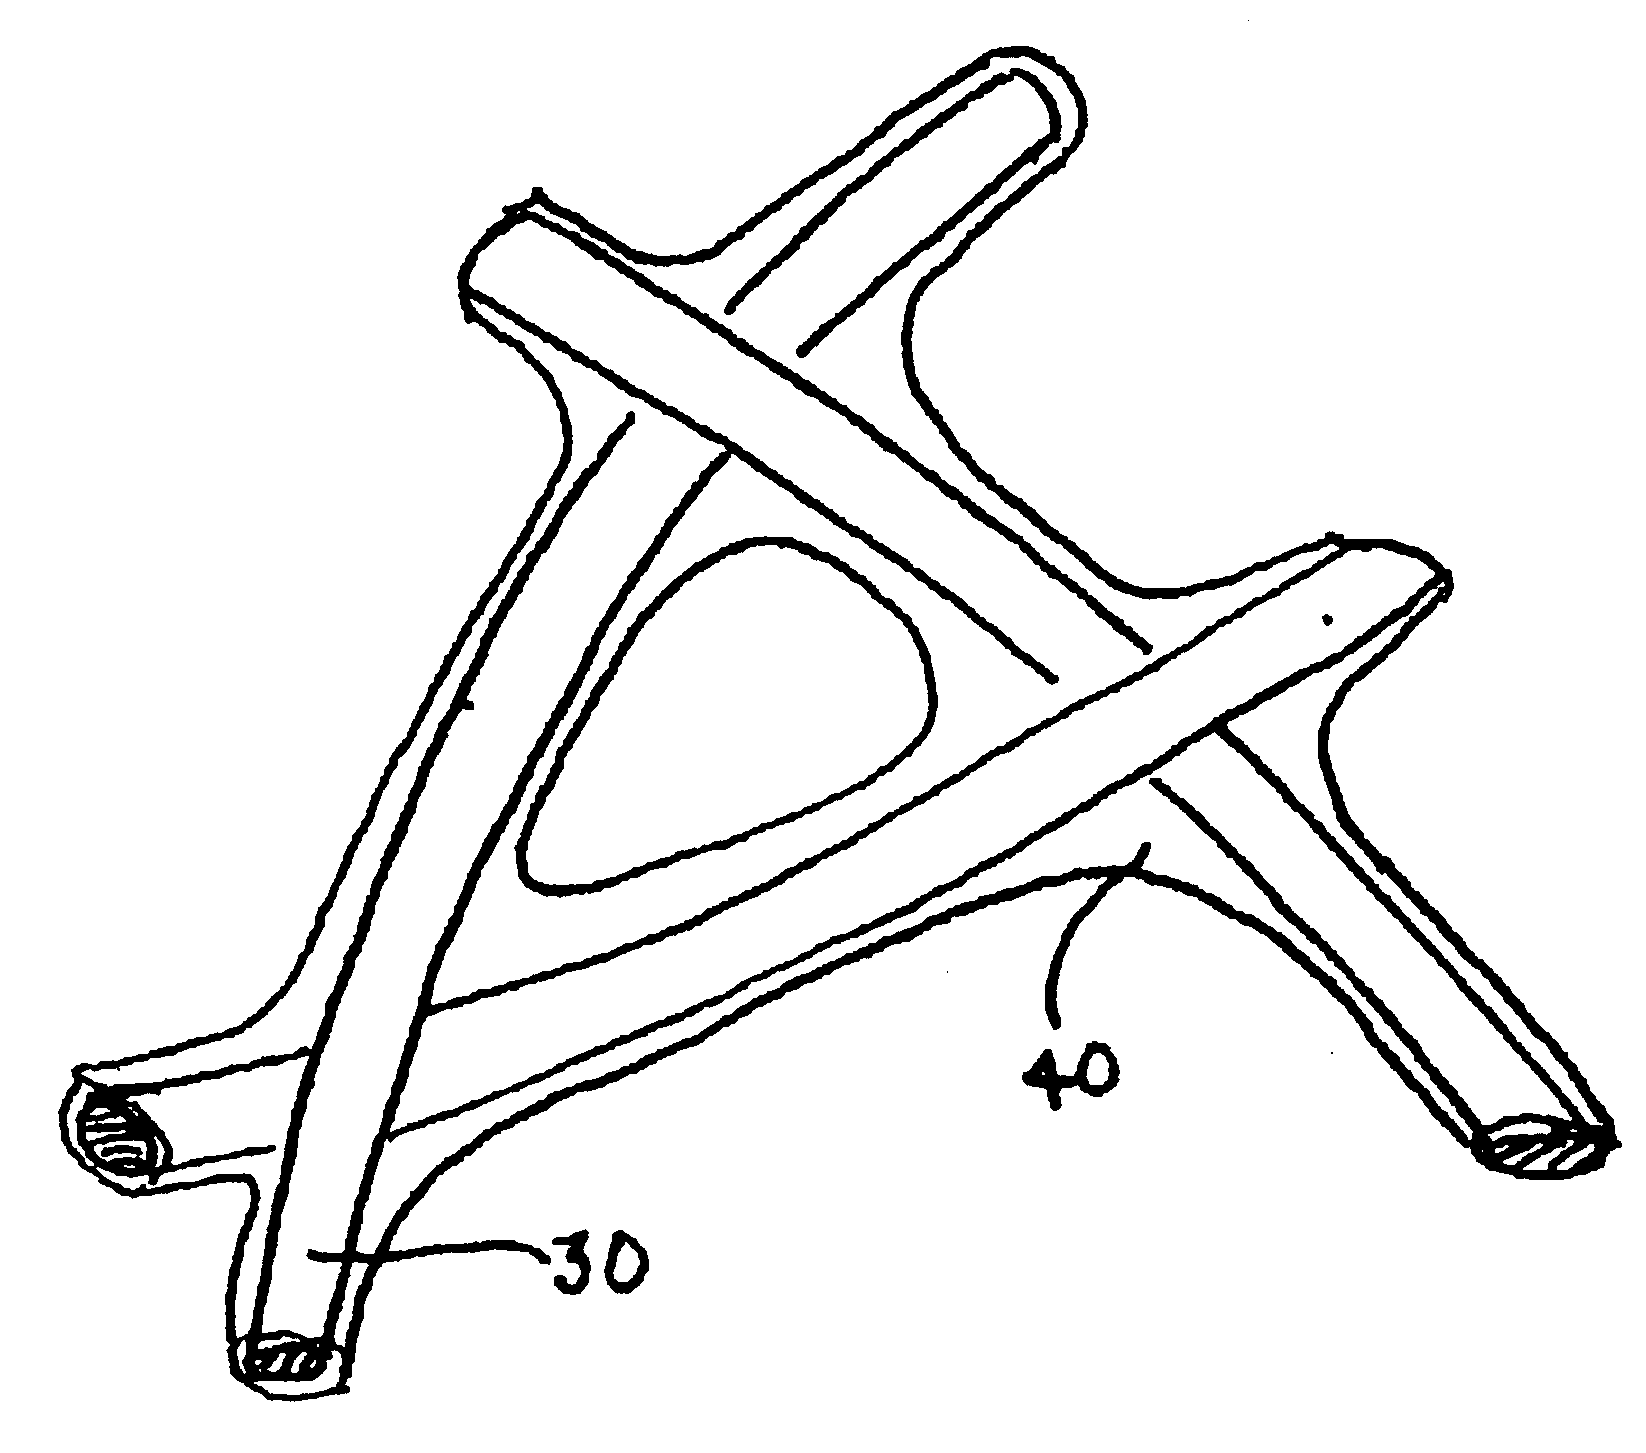 Construction materials containing surface modified fibers